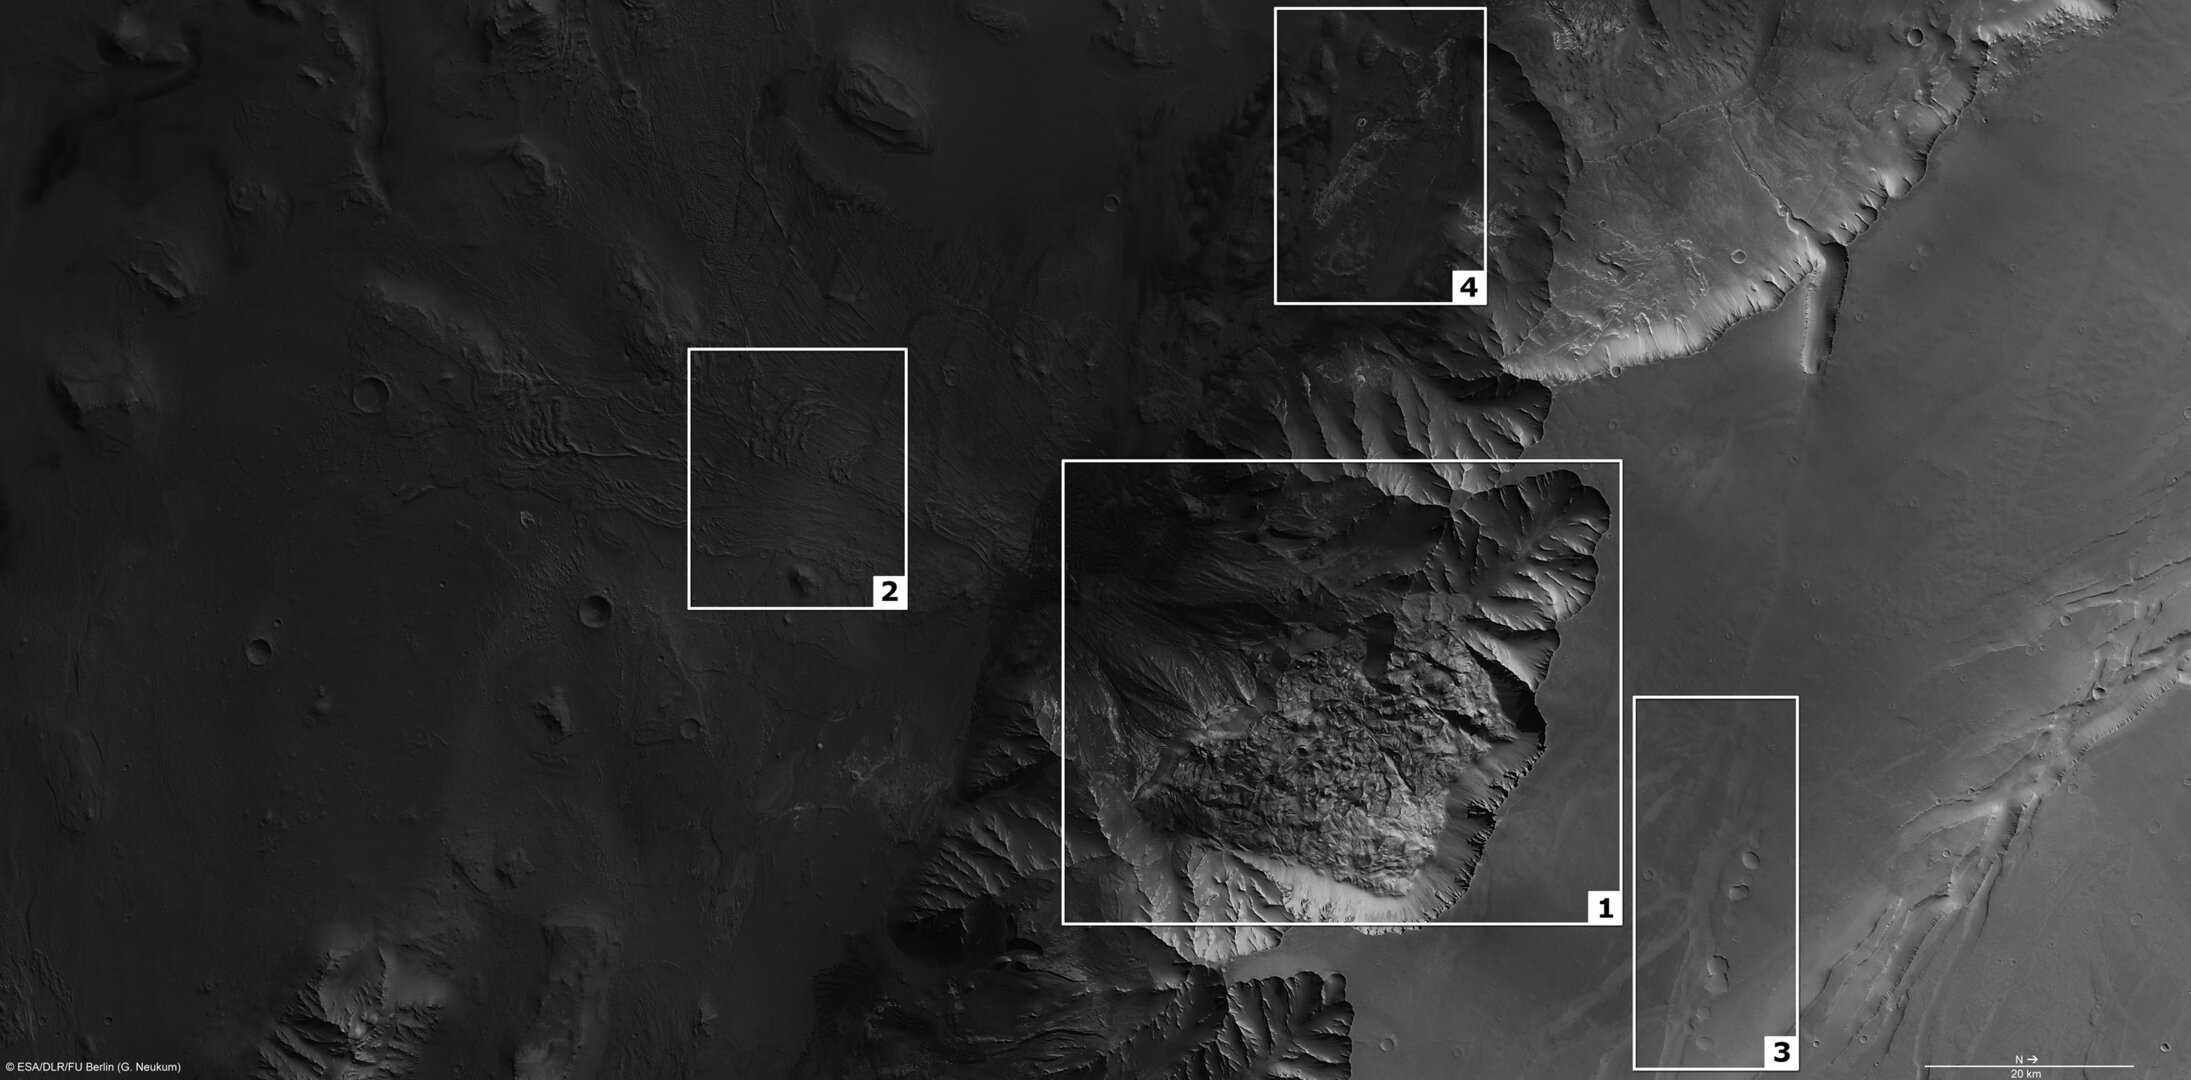 Features in Melas Chasma on Mars